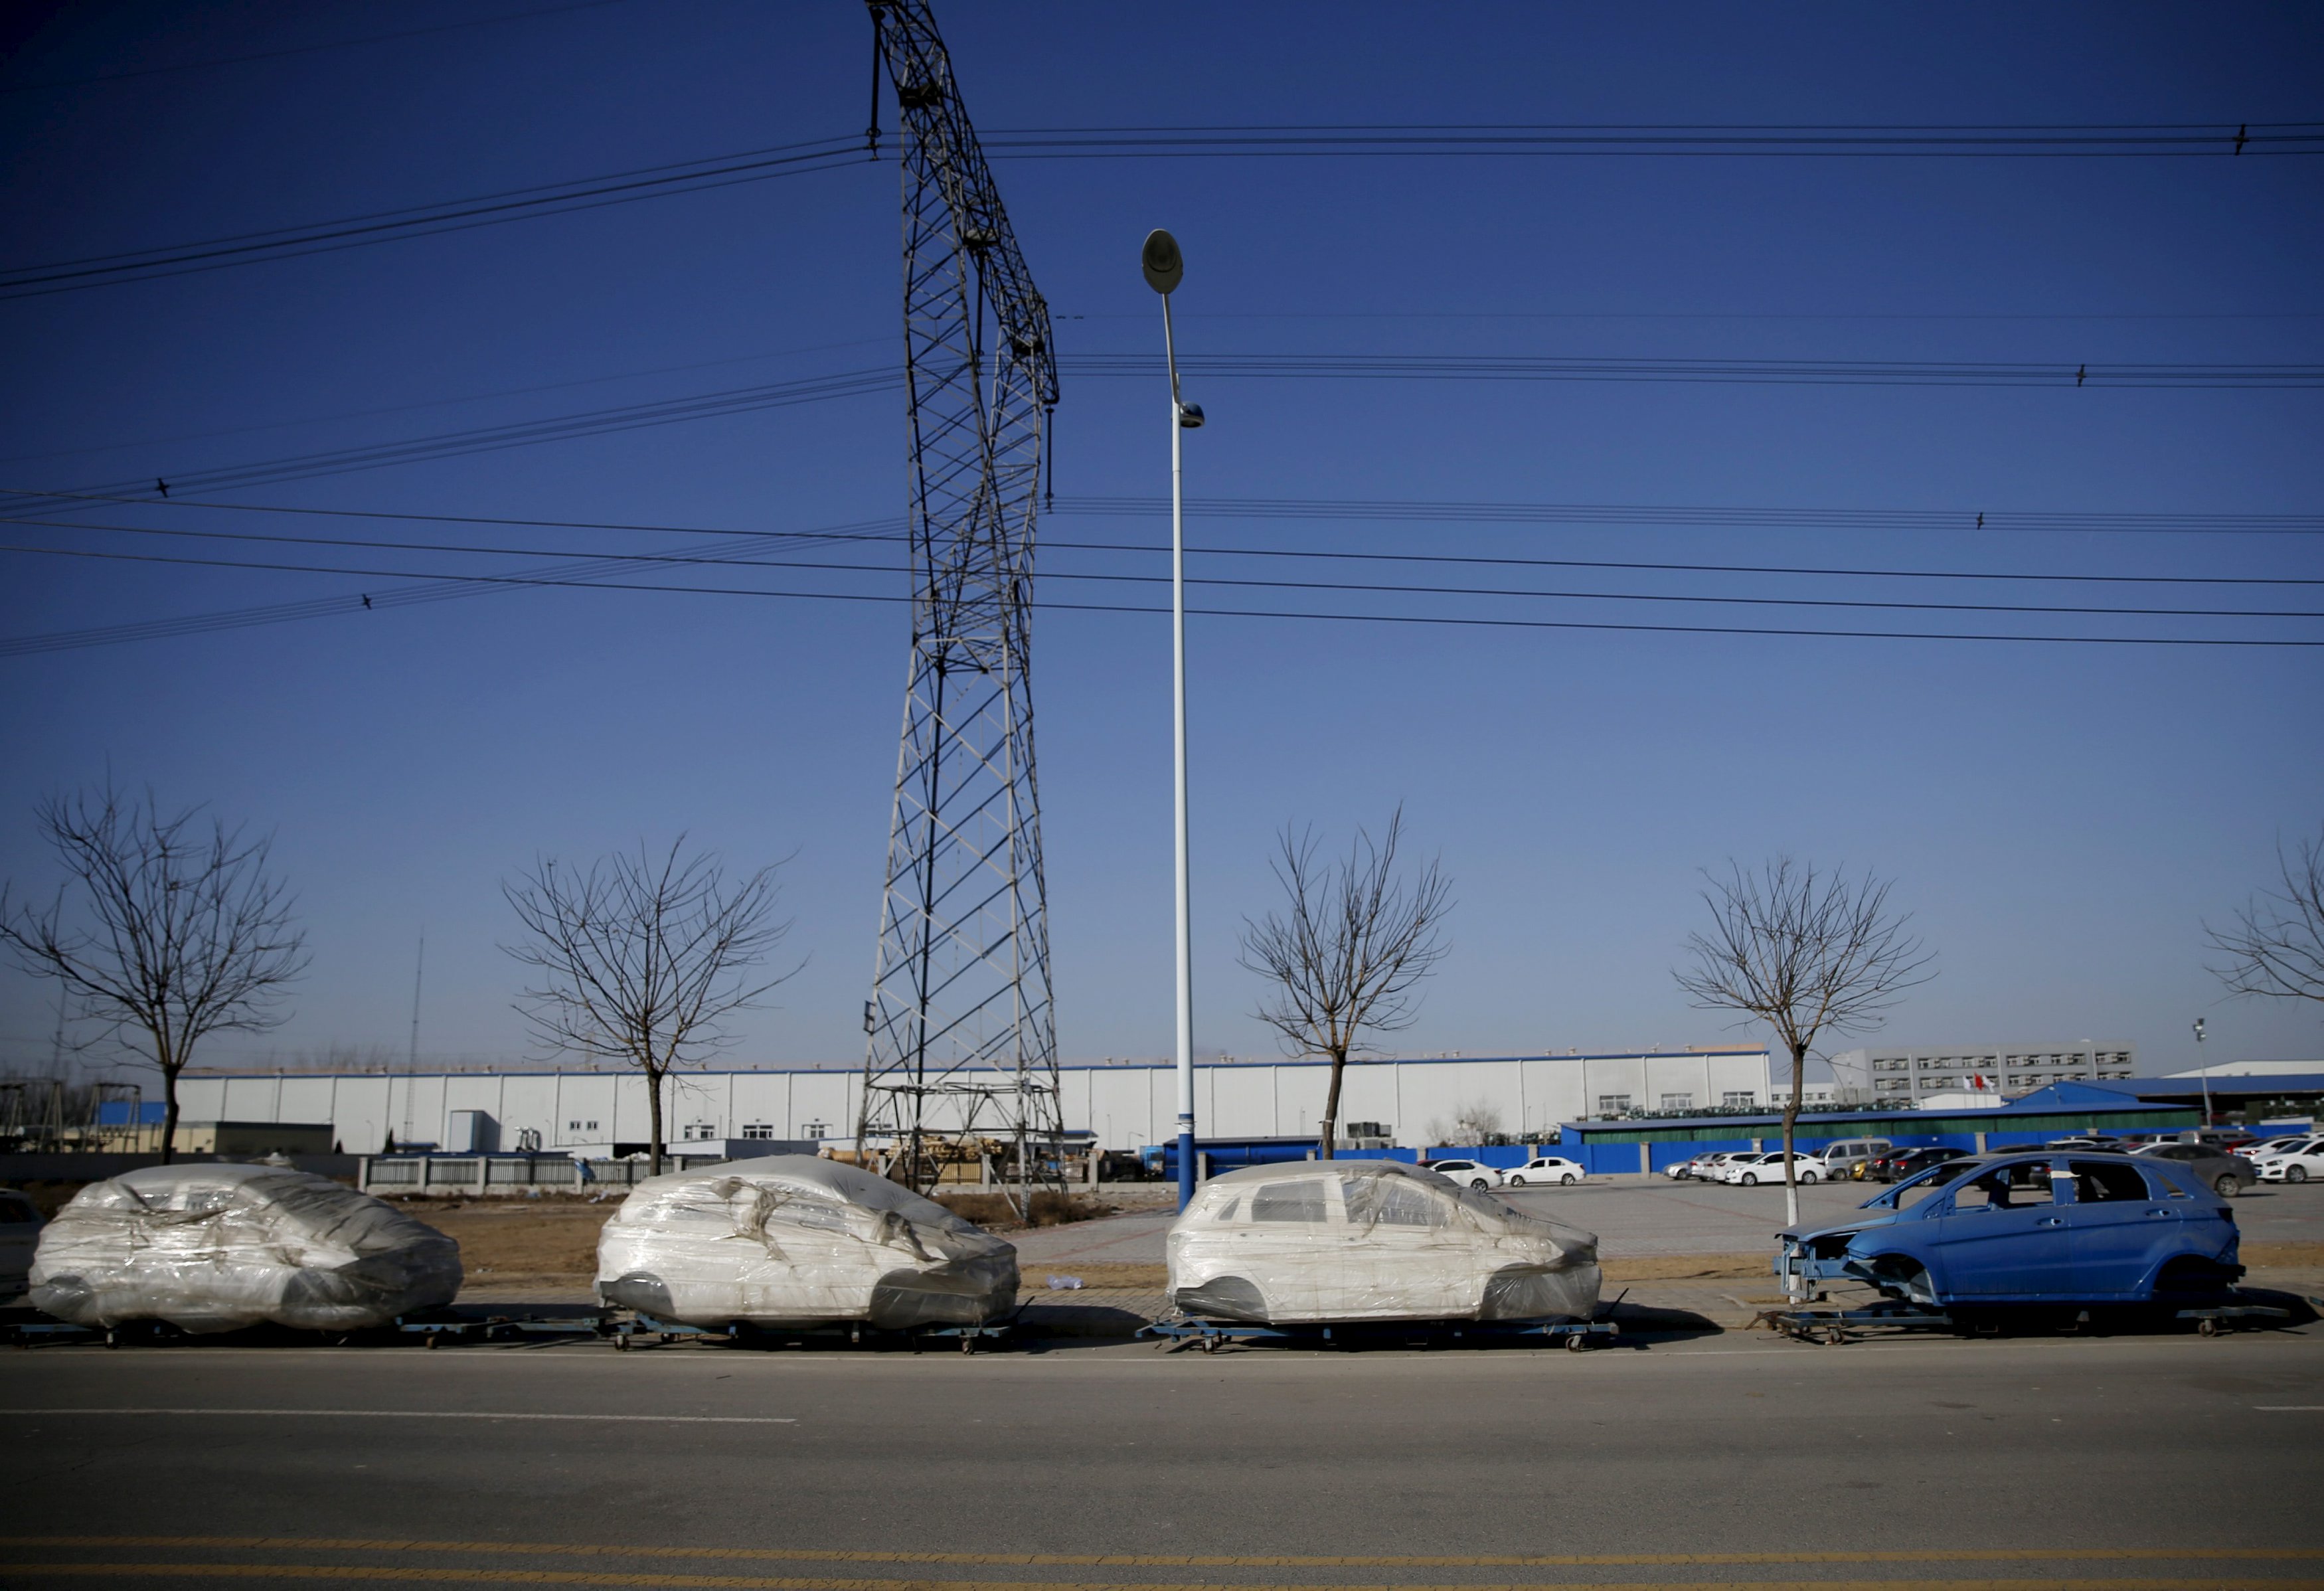 Car frames wrapped in plastics are seen placed outside a car factory at an industrial complex in Beijing, China, January 18, 2016. Picture taken January 18. REUTERS/Kim Kyung-Hoon